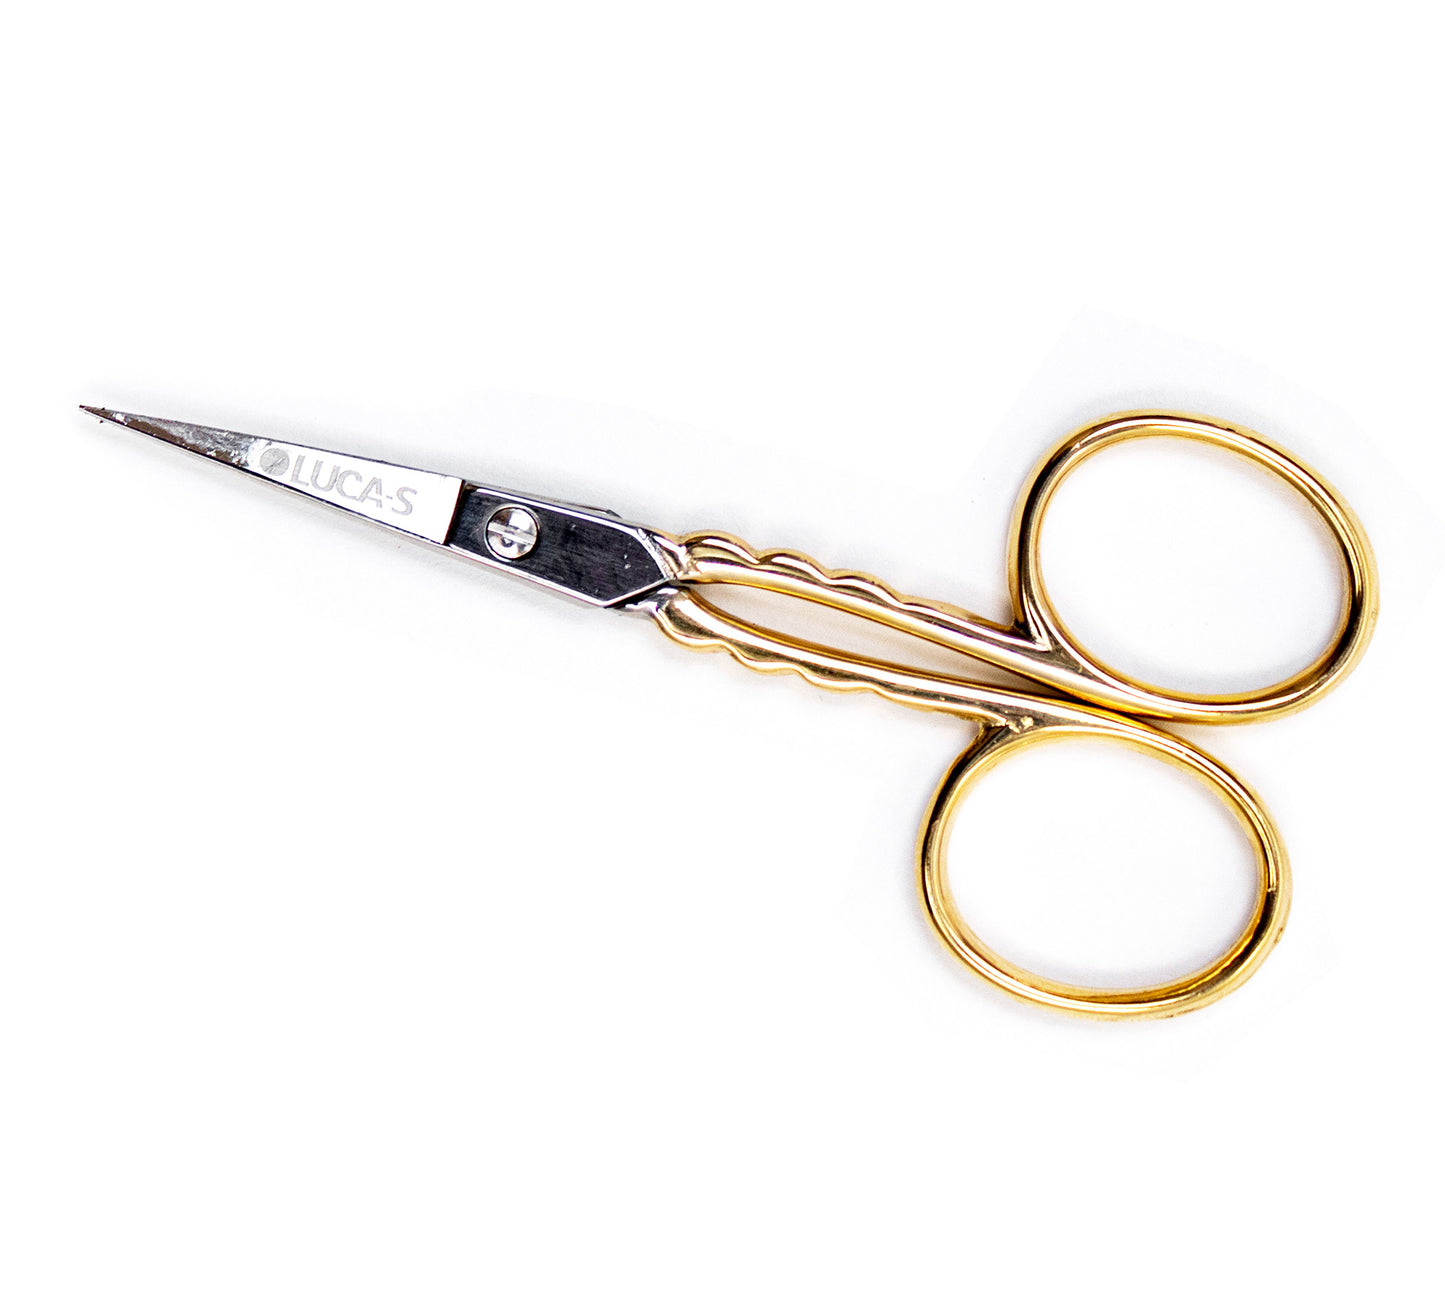 Embroidery Scissors Luca-S -  EMBROIDERY SCISSORS STRAIGHT GOLD HANDLES